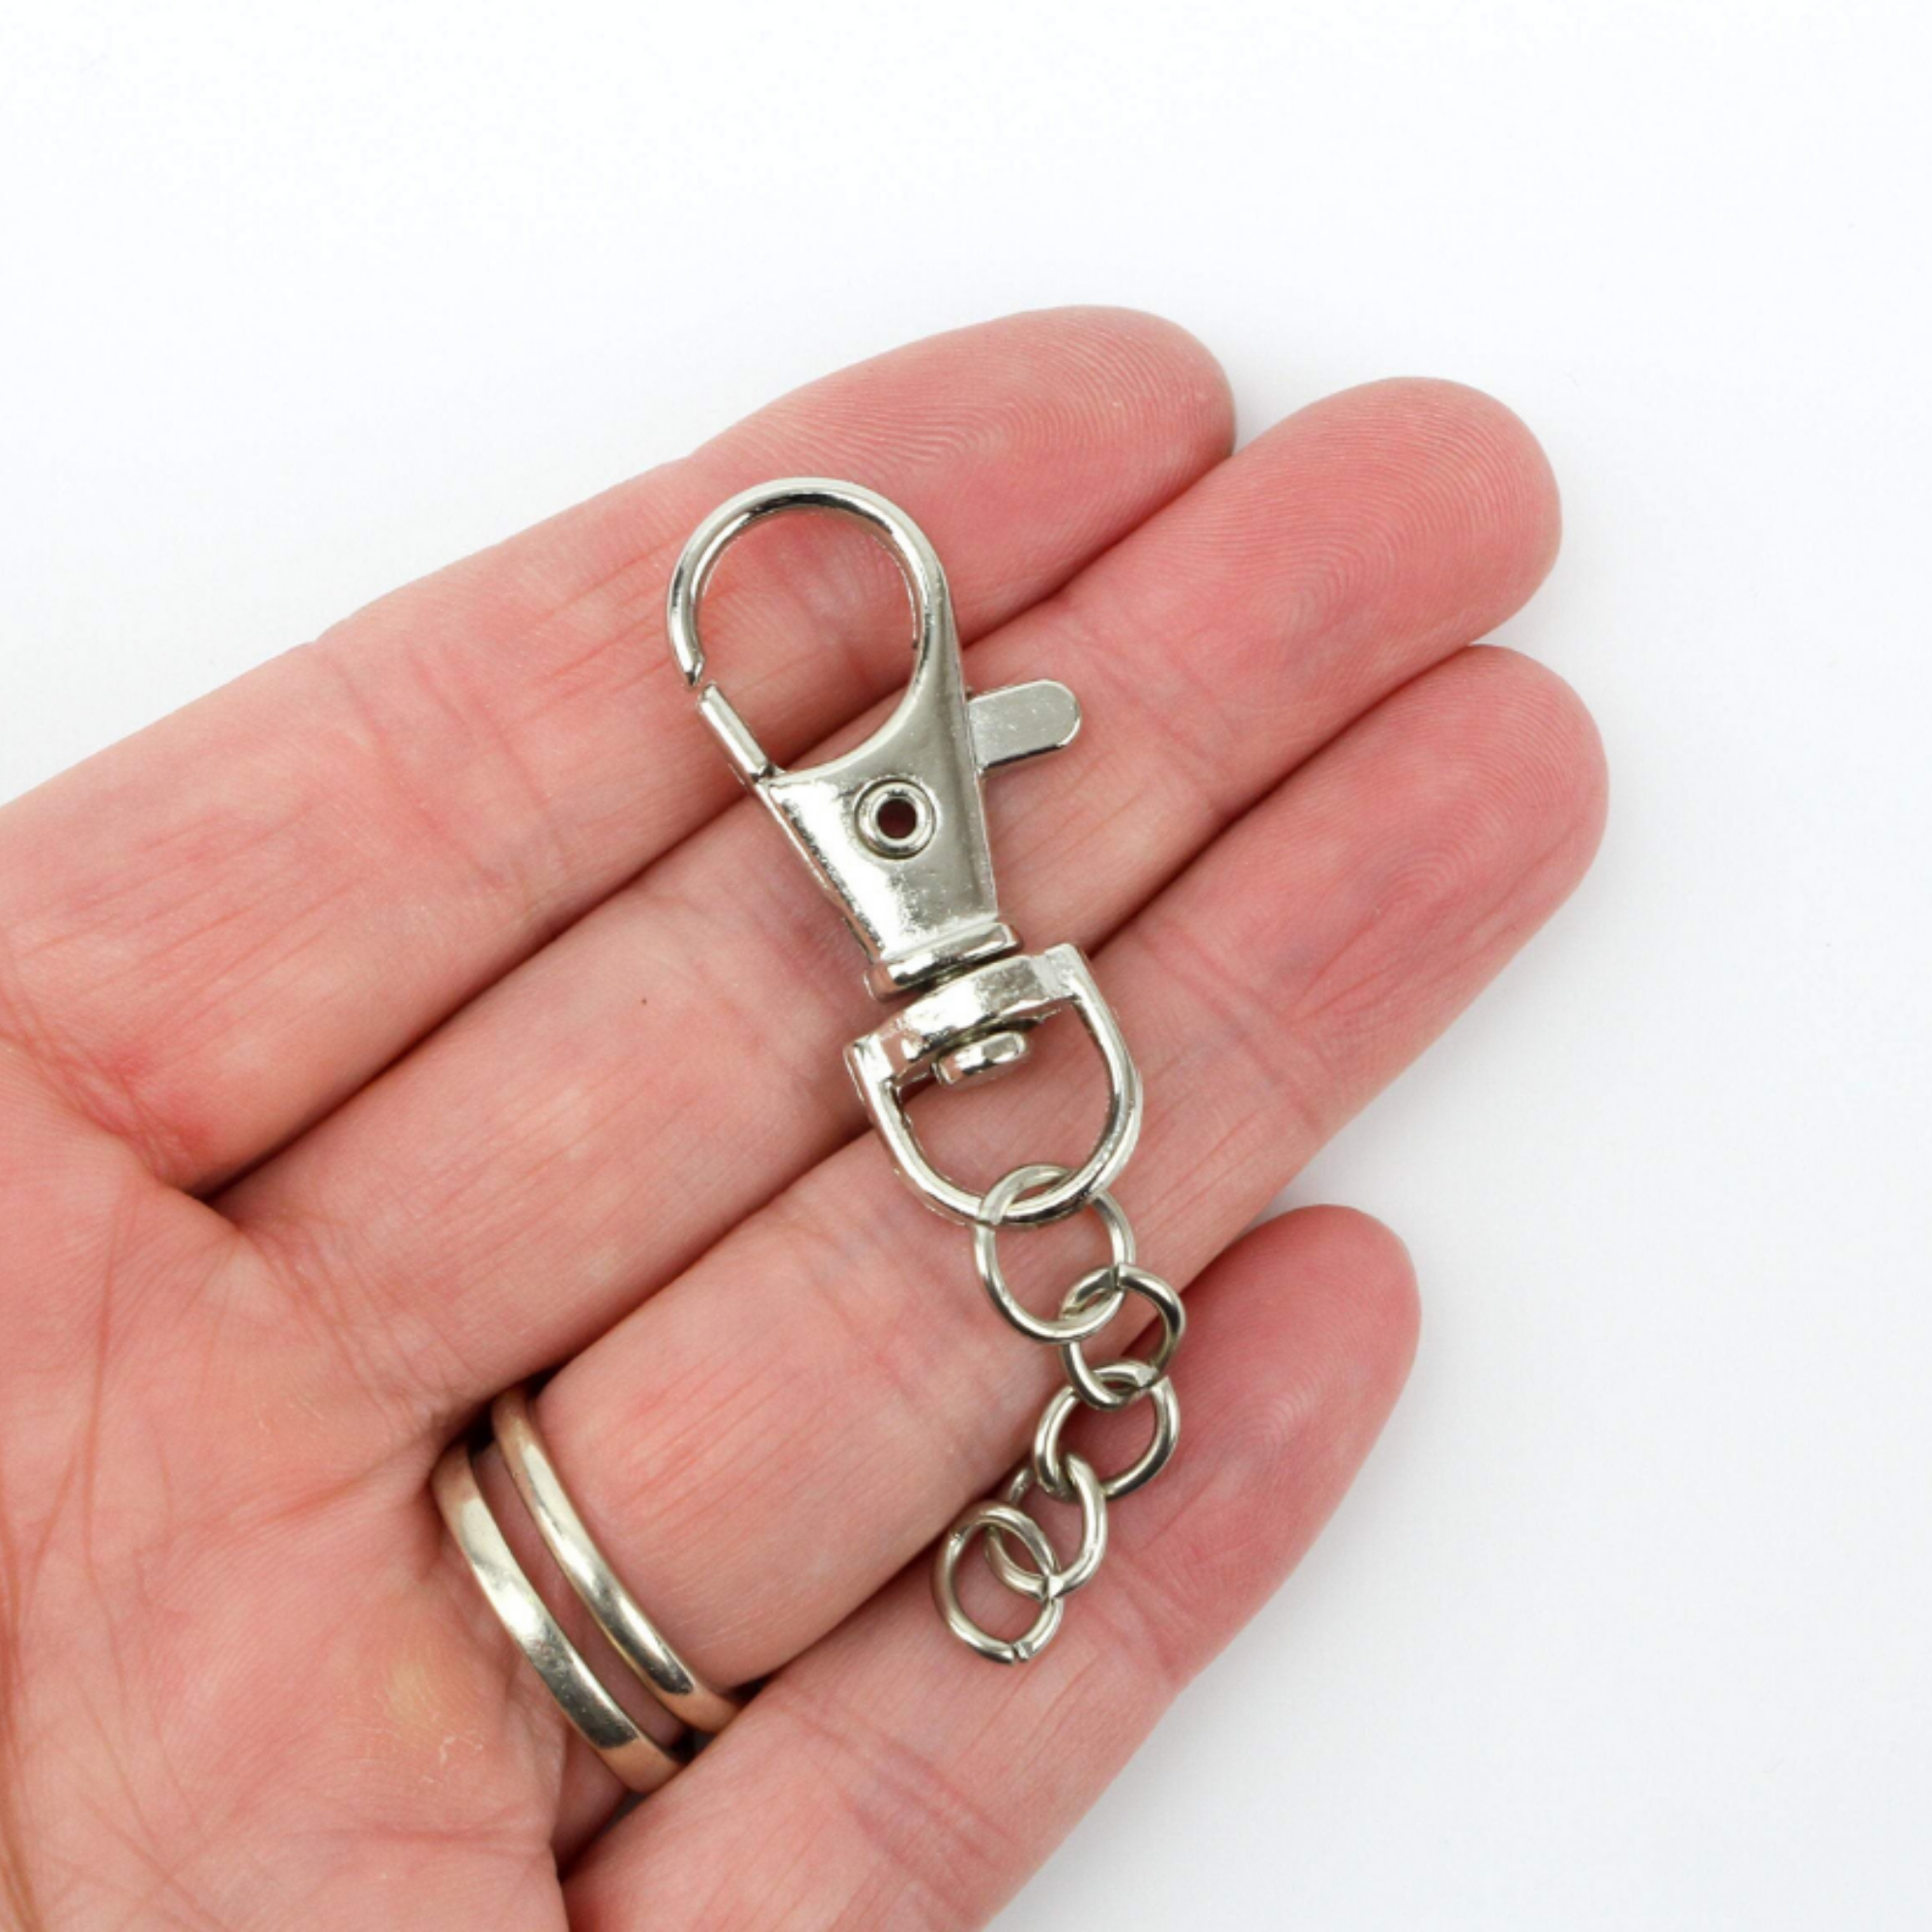 Lobster Clasp Keychain